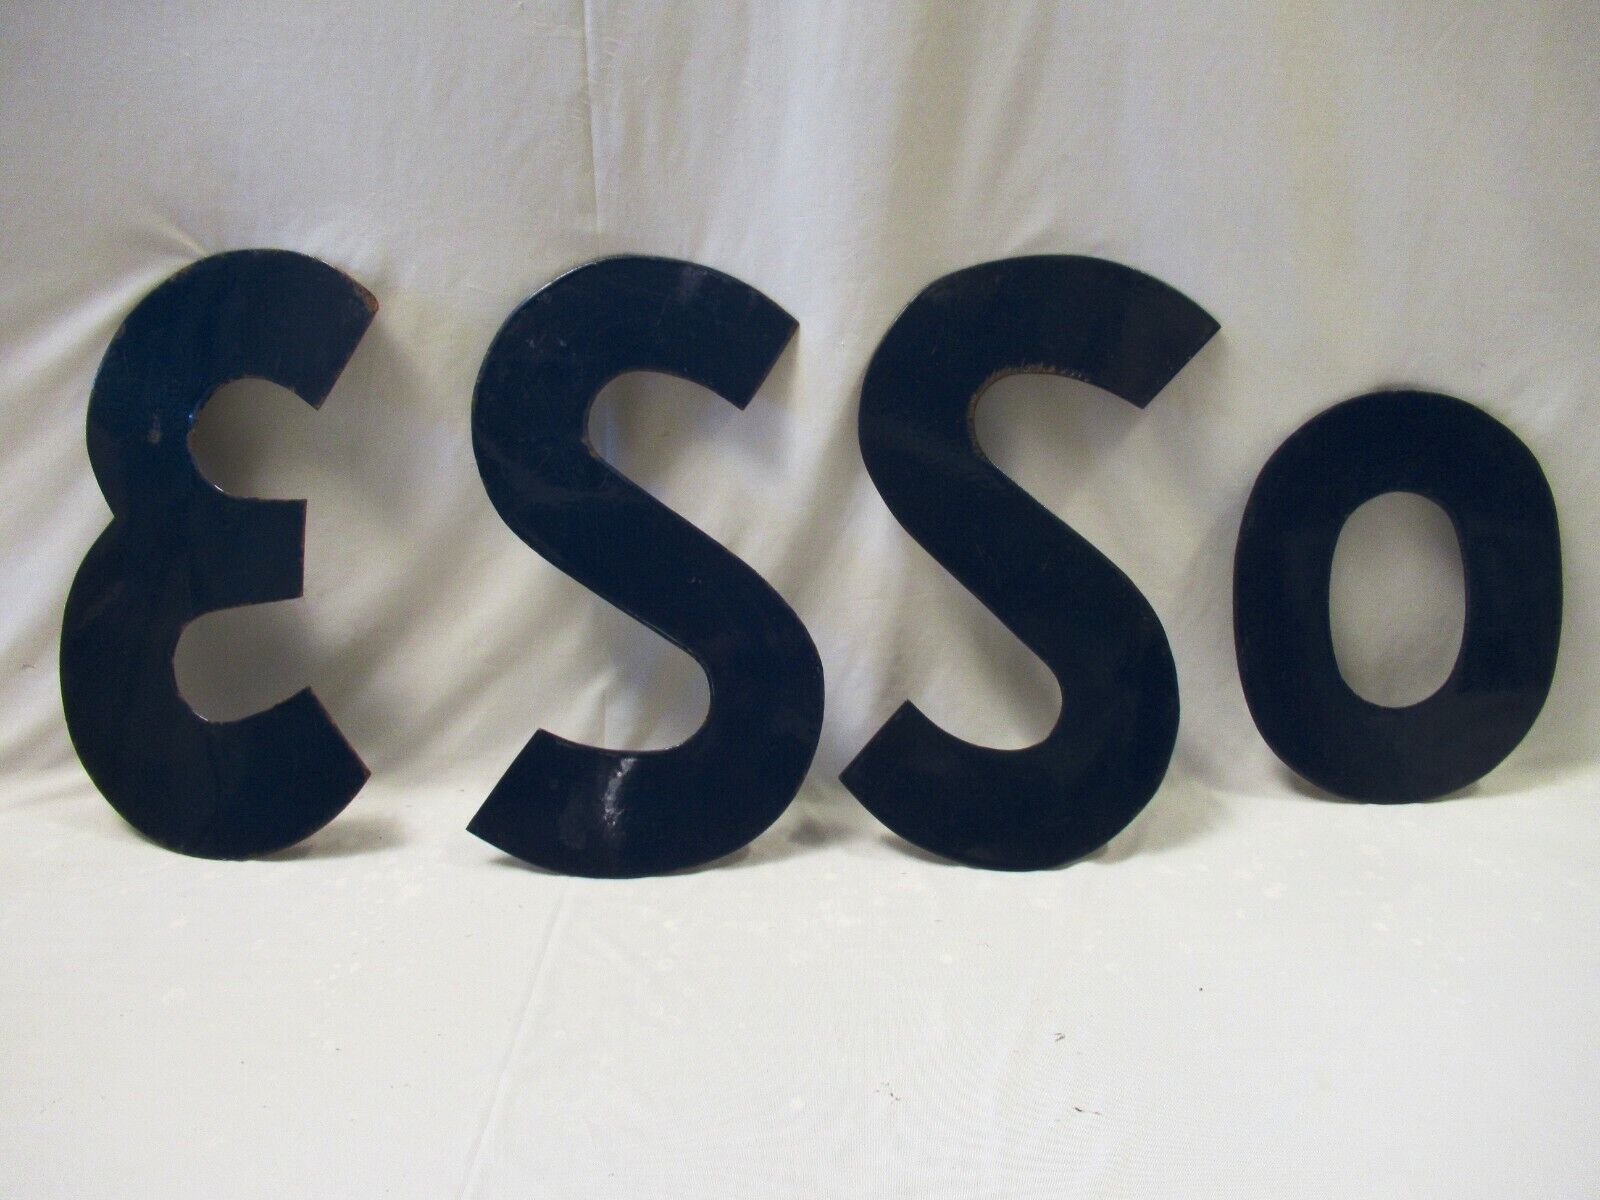 Esso Letters Gas Station Advertising Sign Porcelain Enamel Collectibles Rare 